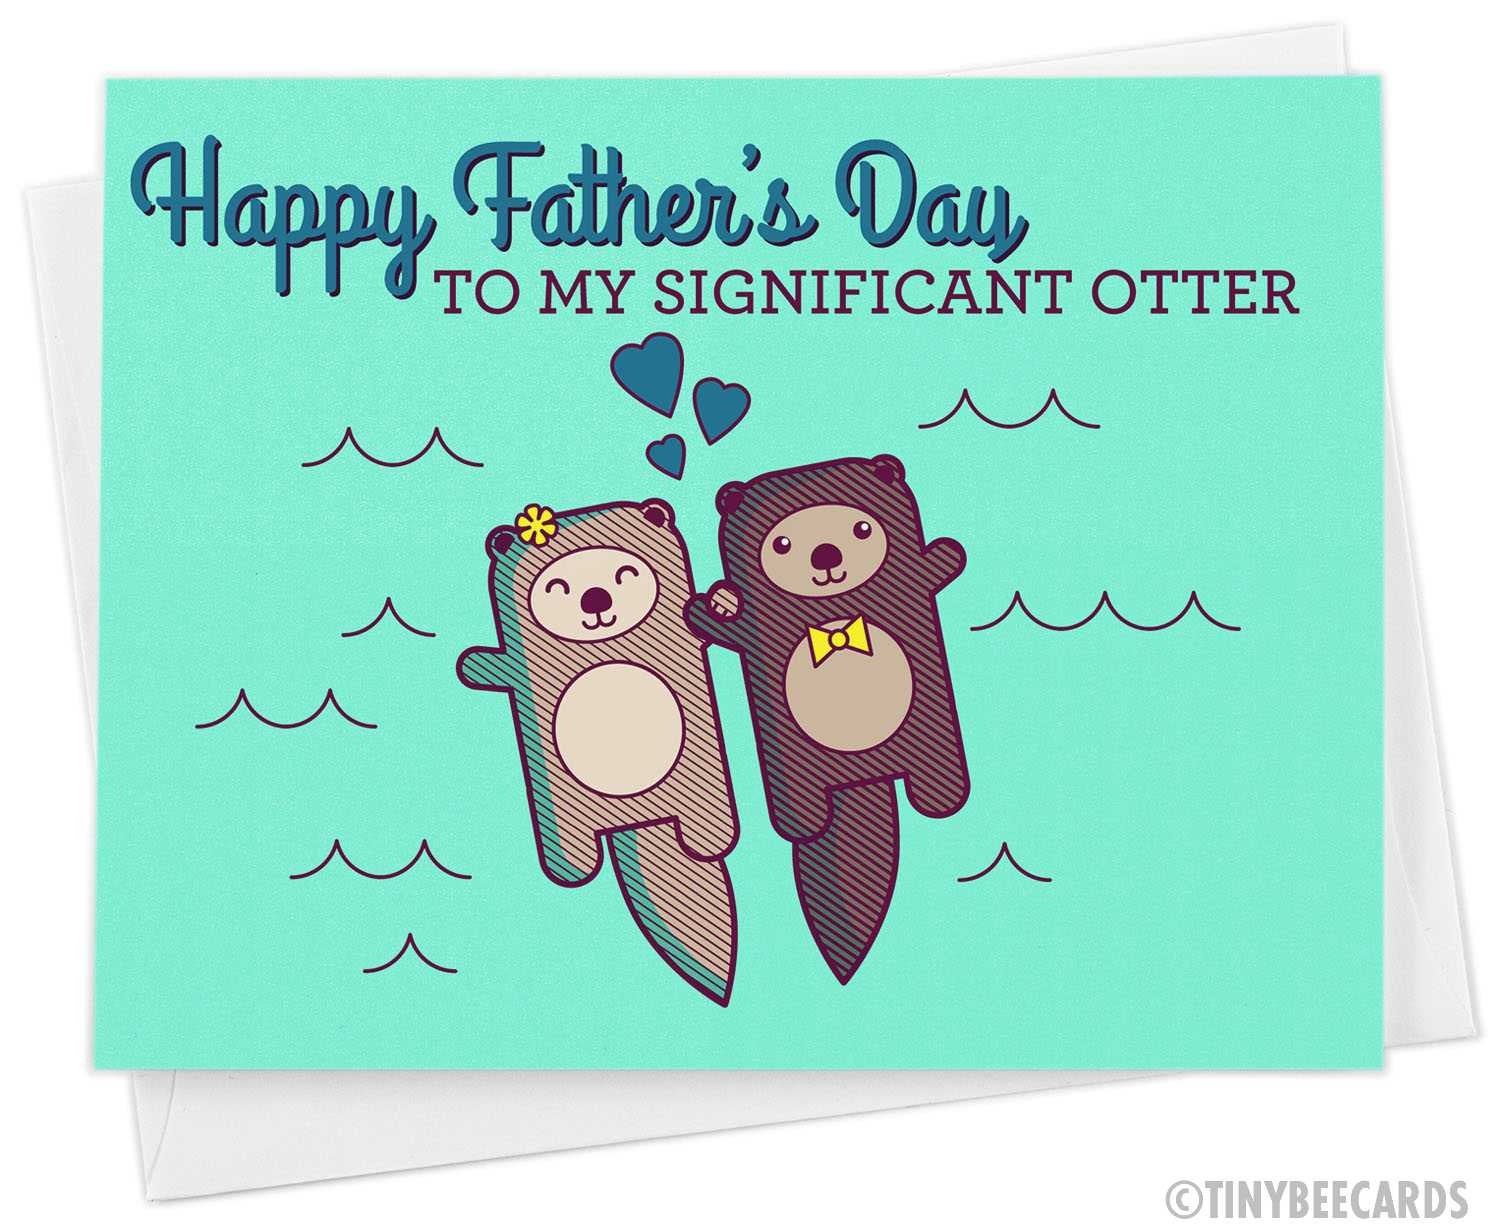 Cute Fathers Day Card for Husband from Wife "Happy Father's Day to my Significant Otter"